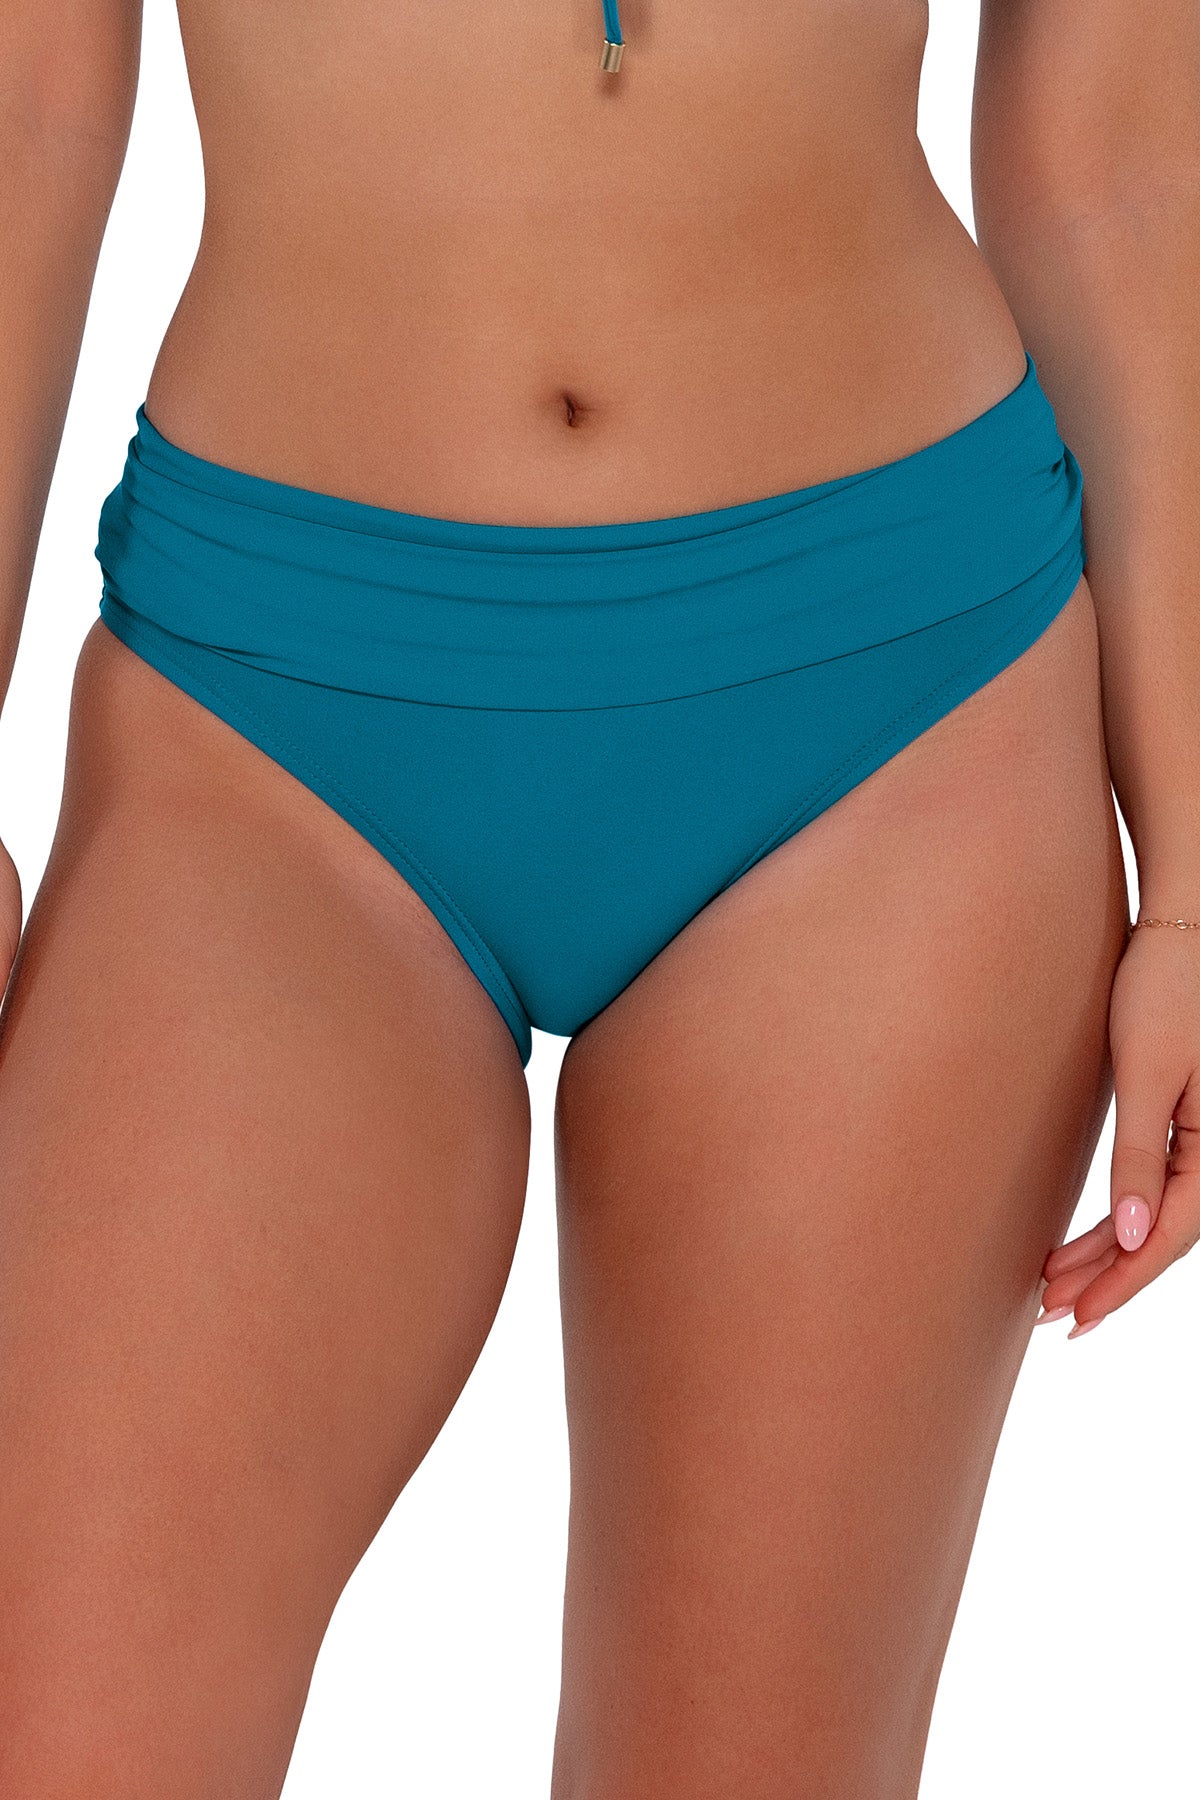 Front pose #1 of Taylor wearing Sunsets Avalon Teal Unforgettable Bottom